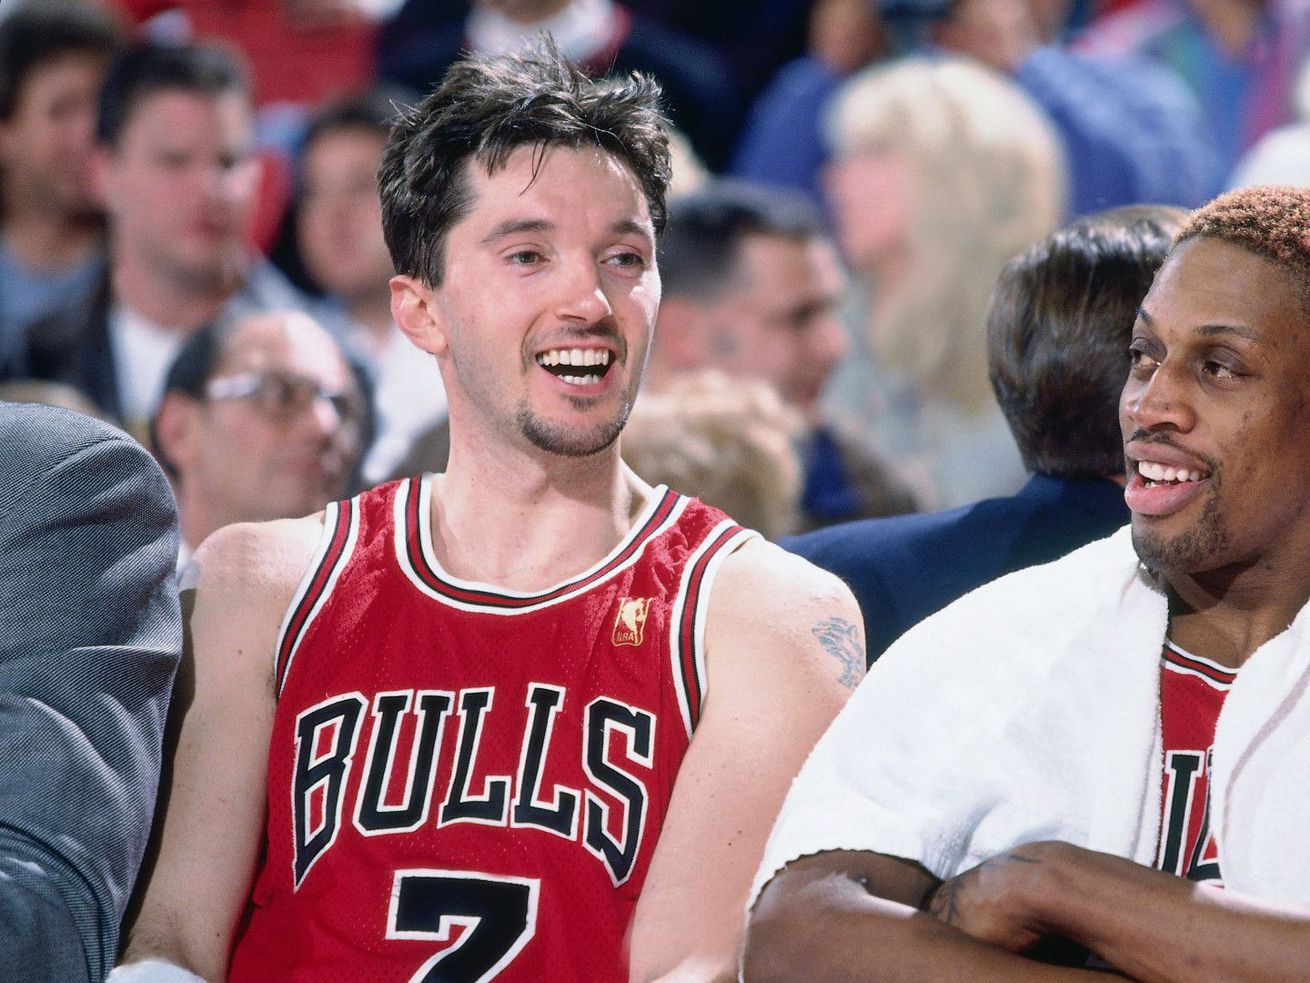 “The difficult thing for me was adjusting to the new team,’’ new Hall of Famer Toni Kukoč said of joining the Bulls. “As well as I played here in Europe, it was something totally different. I had to get used to a new system, new teammates, a new coaching staff.” 